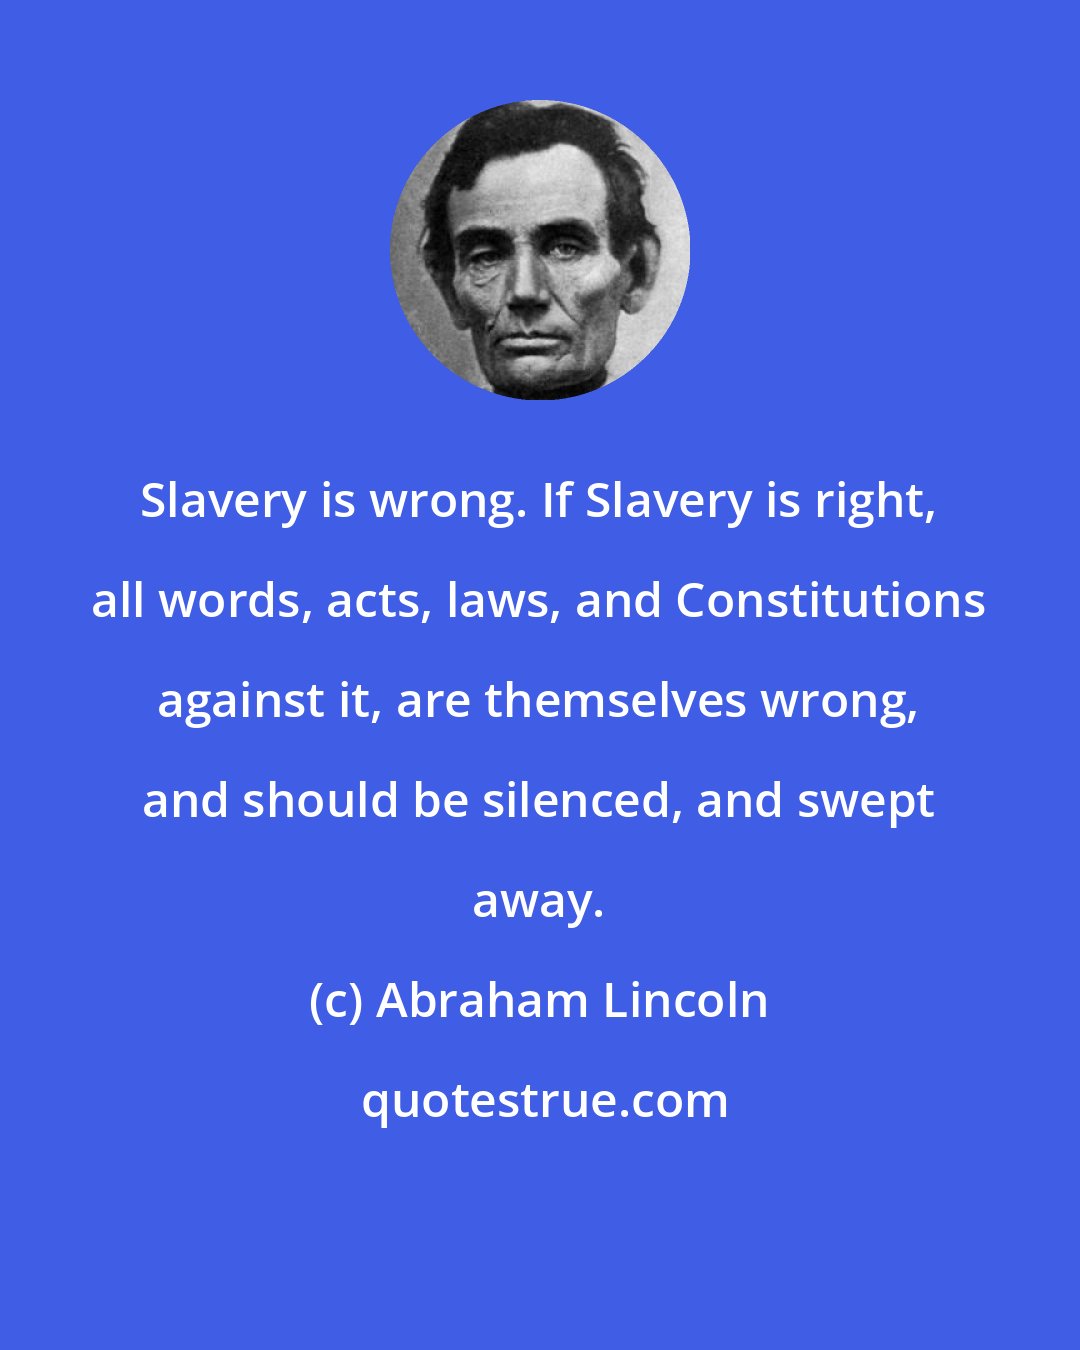 Abraham Lincoln: Slavery is wrong. If Slavery is right, all words, acts, laws, and Constitutions against it, are themselves wrong, and should be silenced, and swept away.